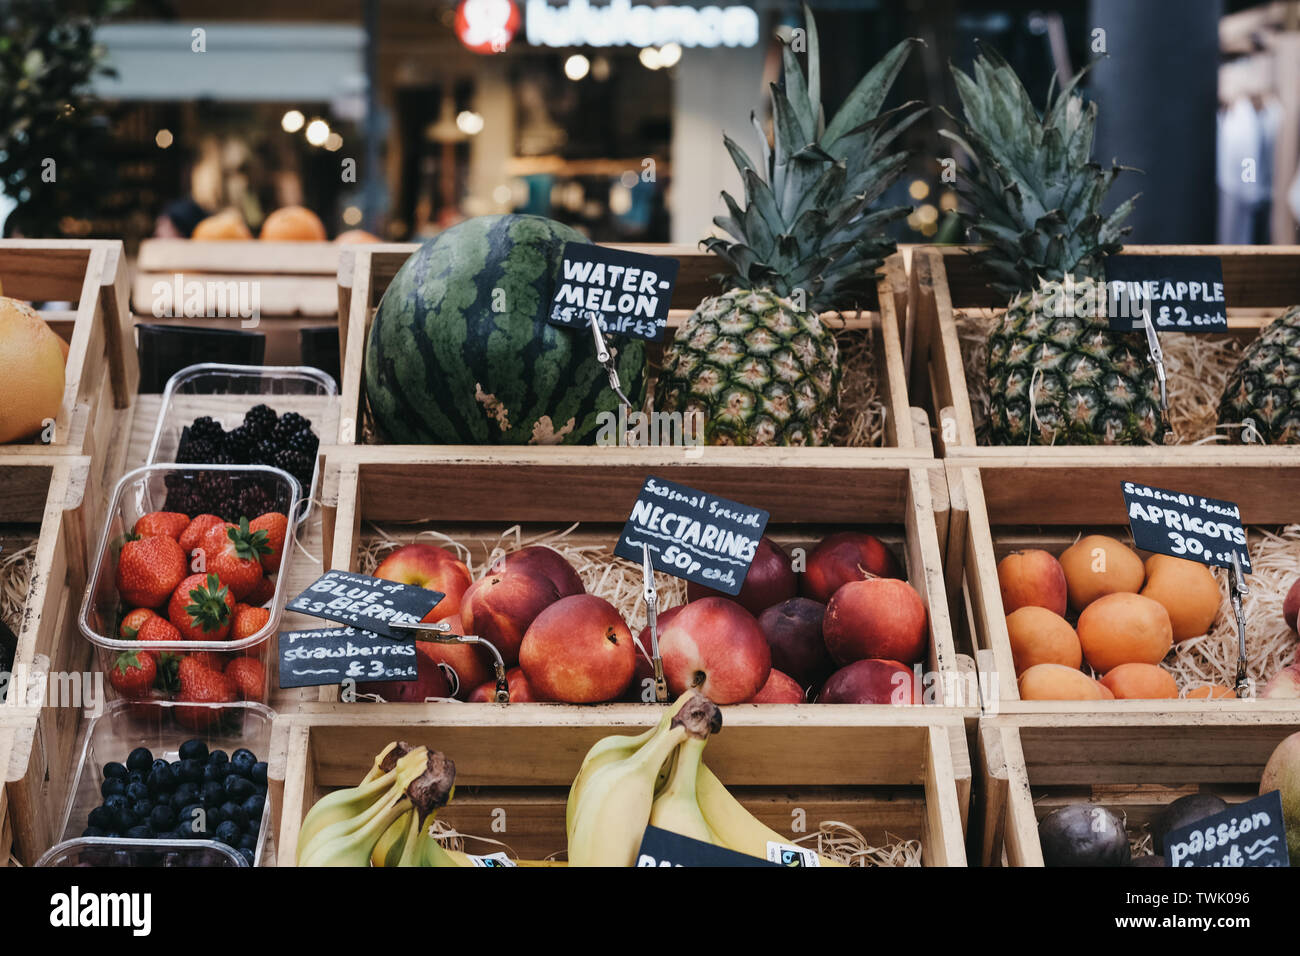 London, UK - June 15, 2019: Fresh fruits in wooden crates on sale at Spitalfields Market, one of the finest surviving Victorian Market Halls in London Stock Photo